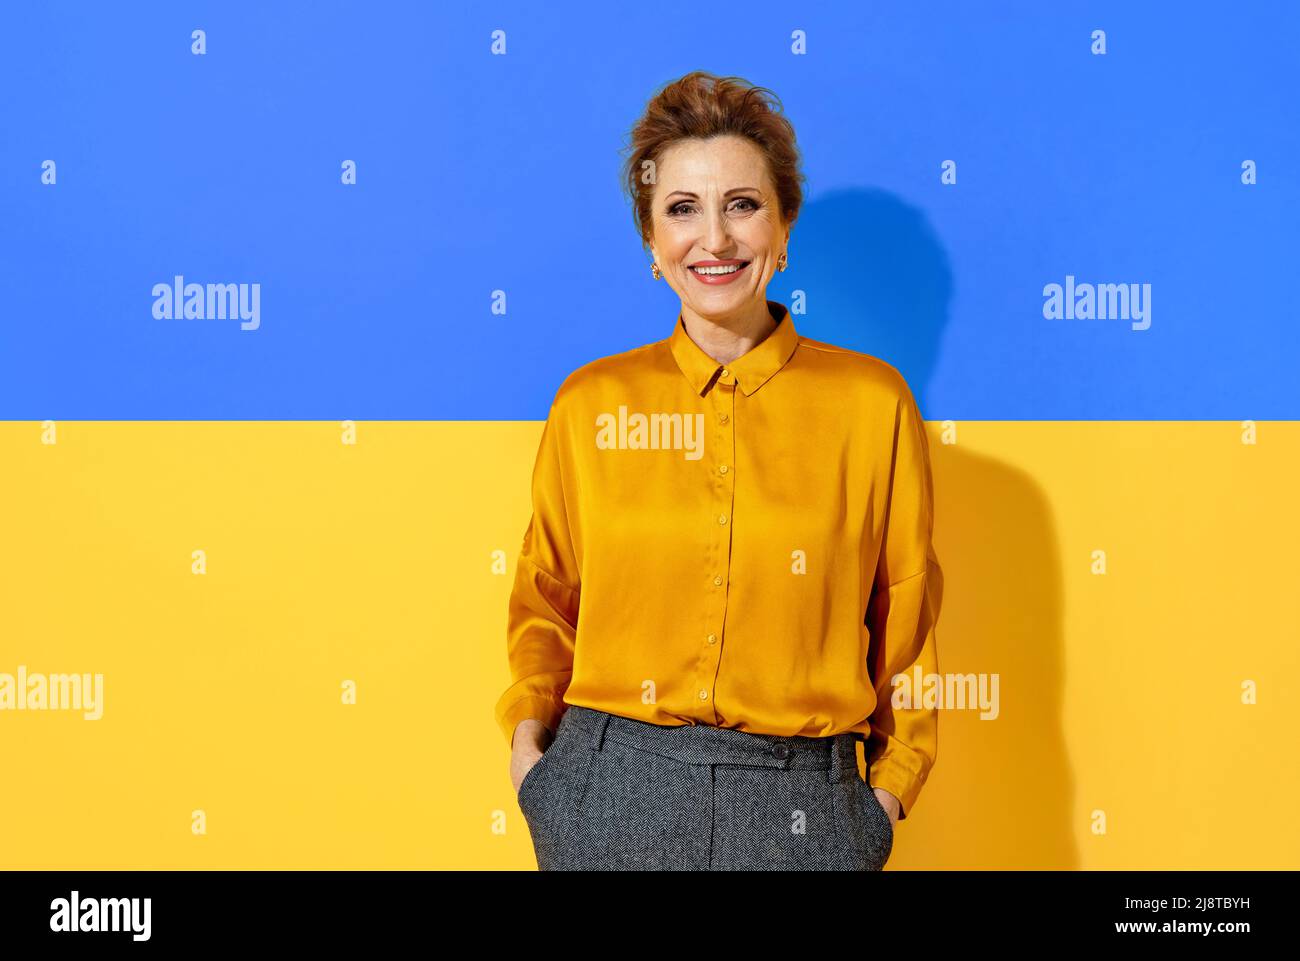 Ukrainian woman laughs happily. Photo of kind attractive woman in yellow shirt against the background of the flag of Ukraine Stock Photo